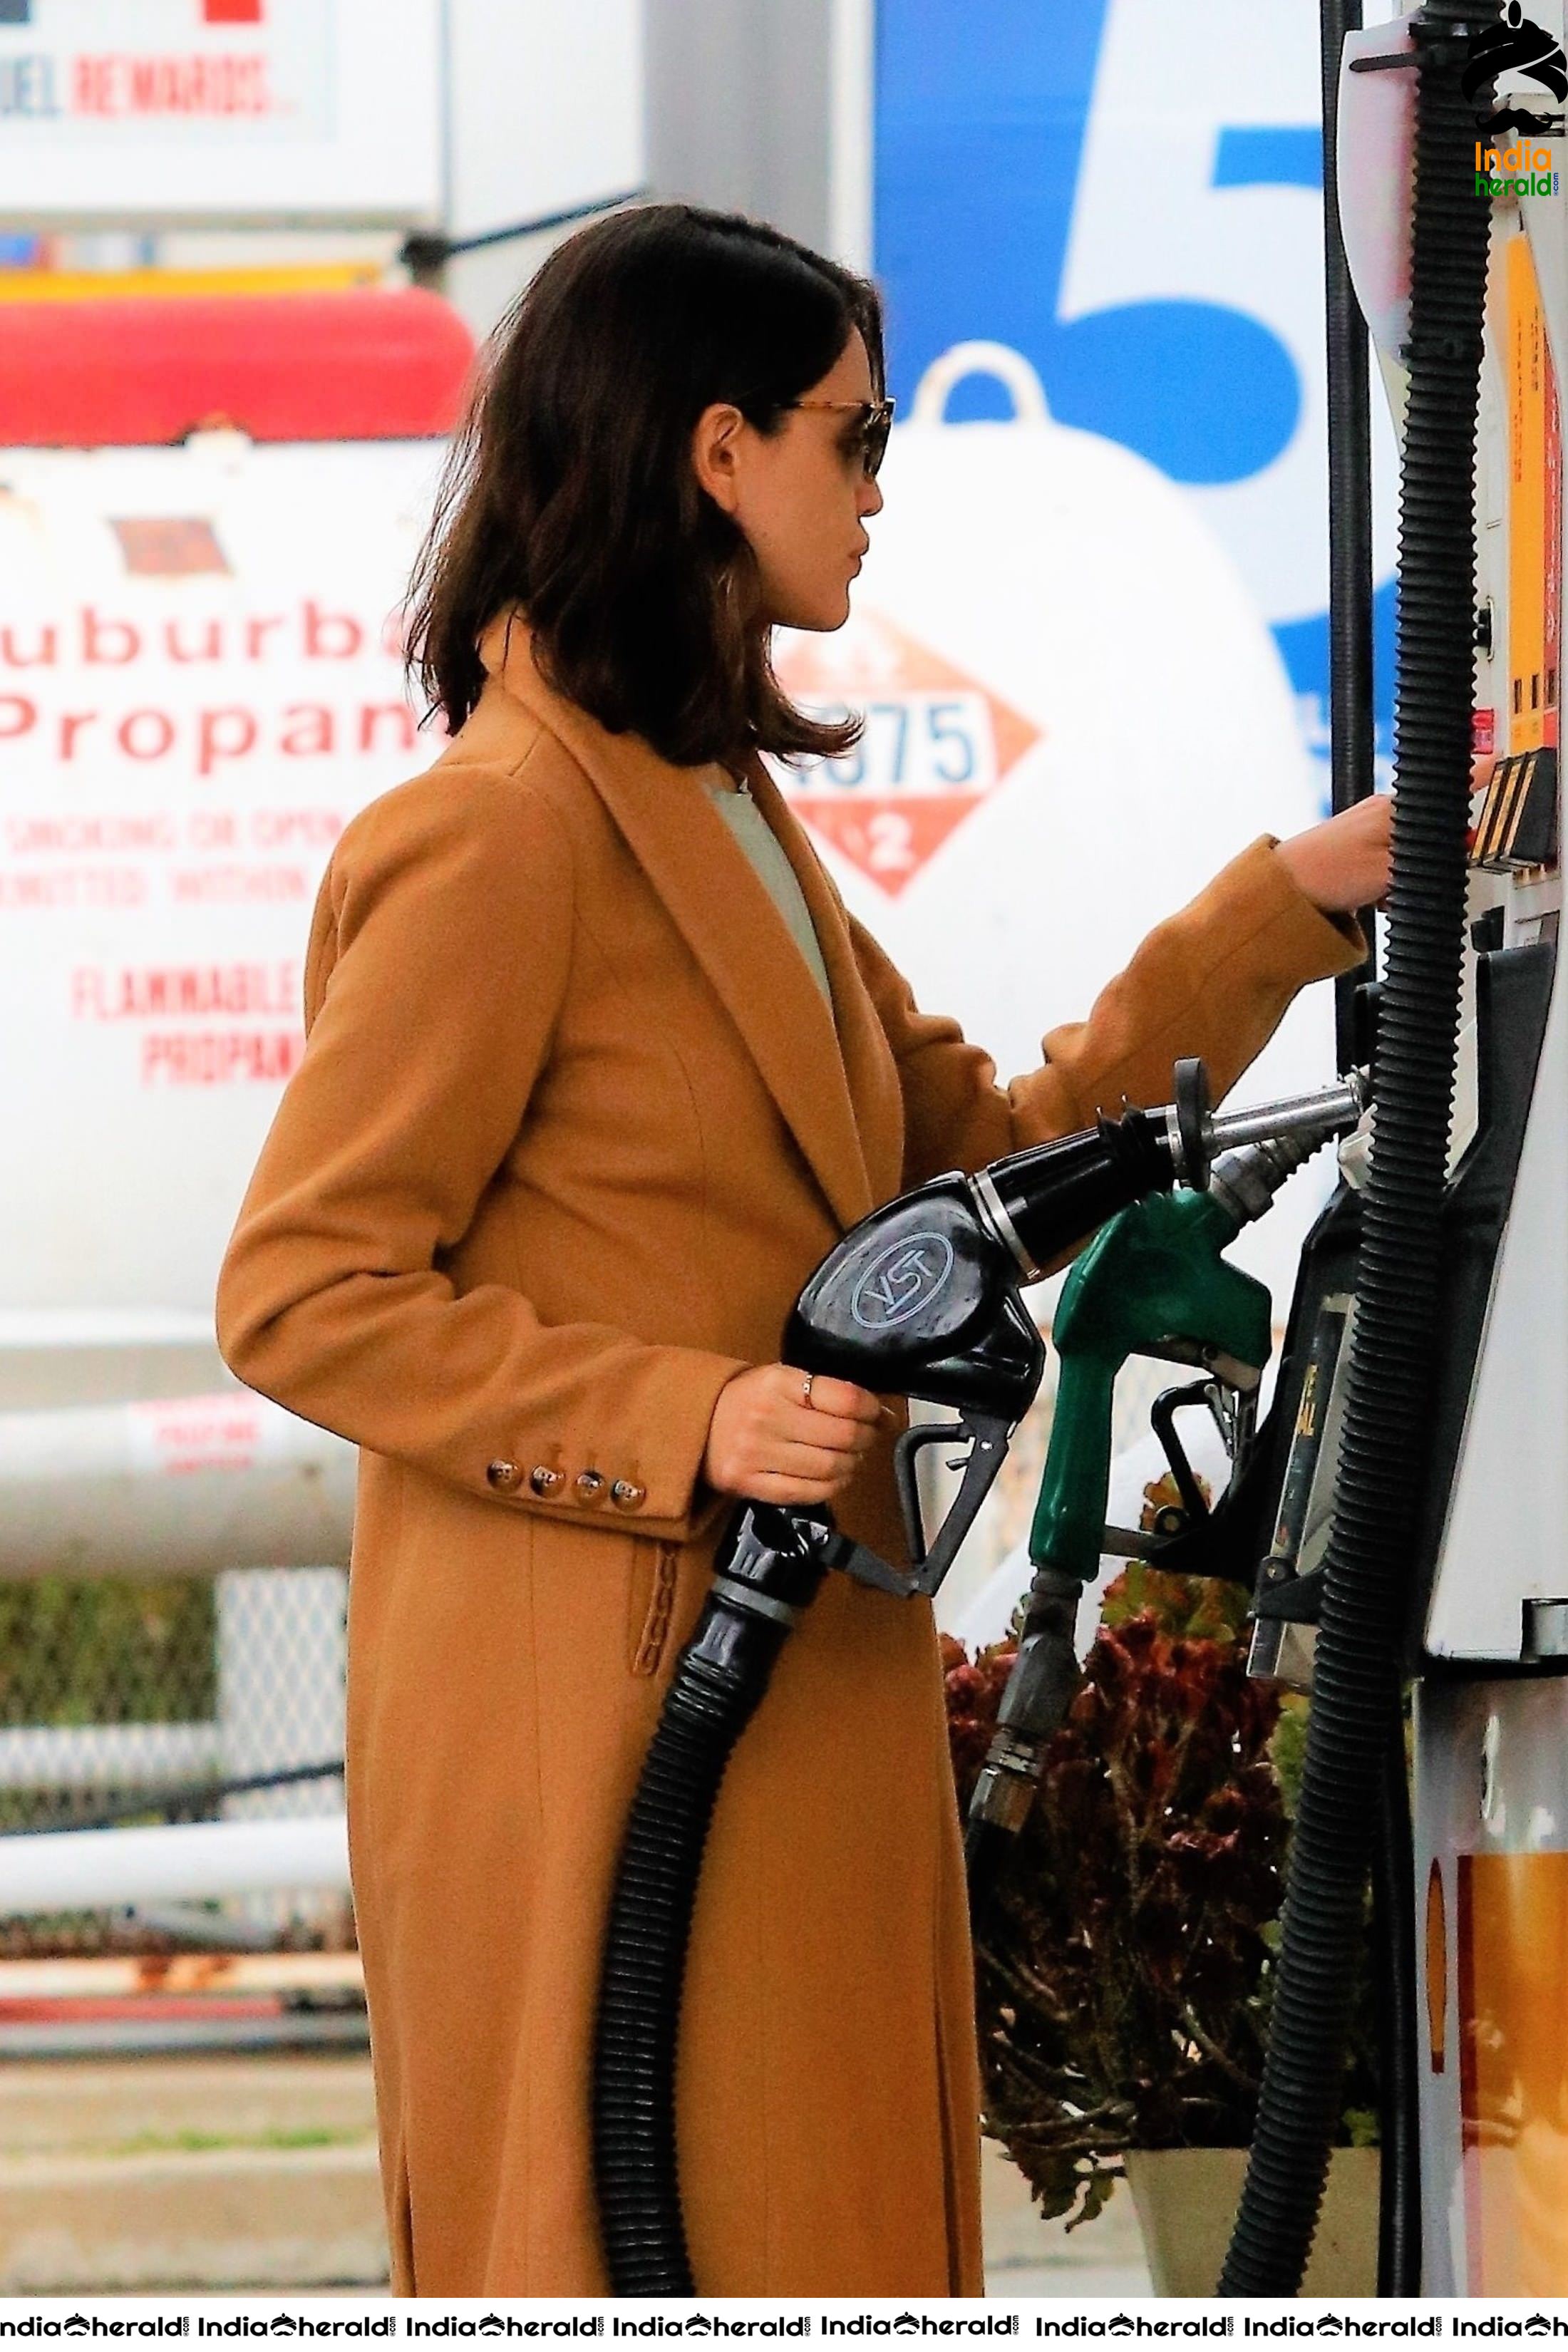 Eiza Gonzalez spotted by Paparazzi at a Gas Station while out in Los Angeles